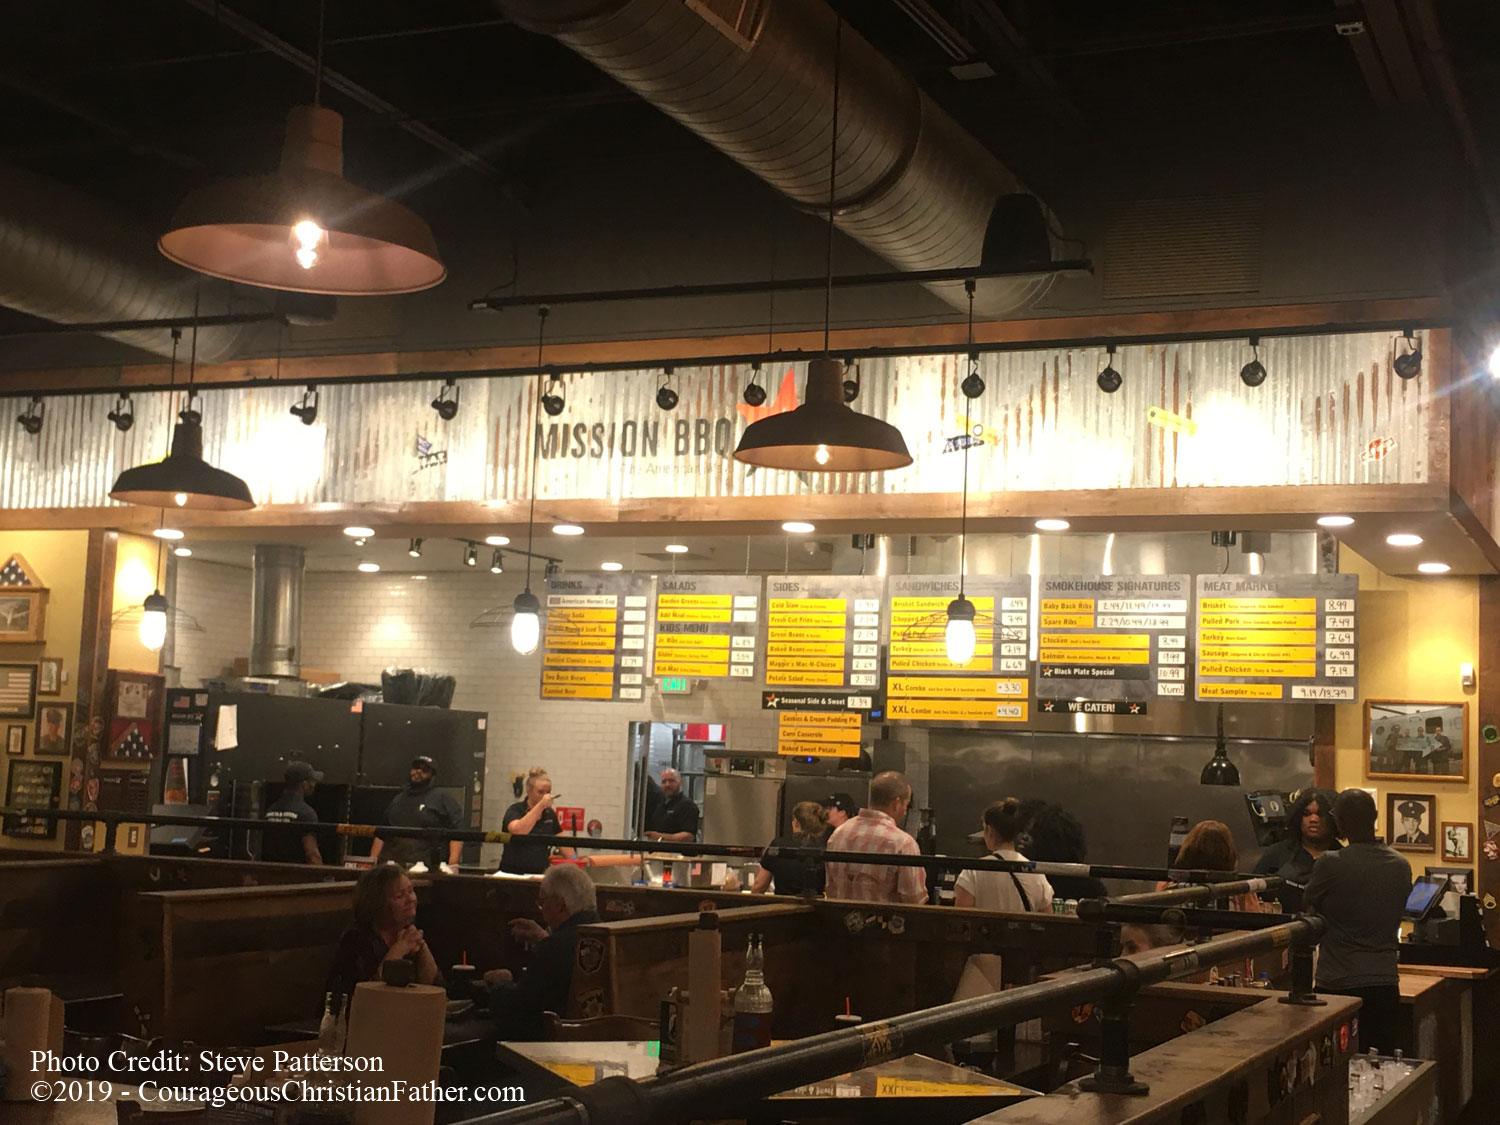 Mission BBQ - This is this weeks Travel Thursday feature. I share about my experience at Missionary BBQ in Chattanoga, TN. #MissionBBQ